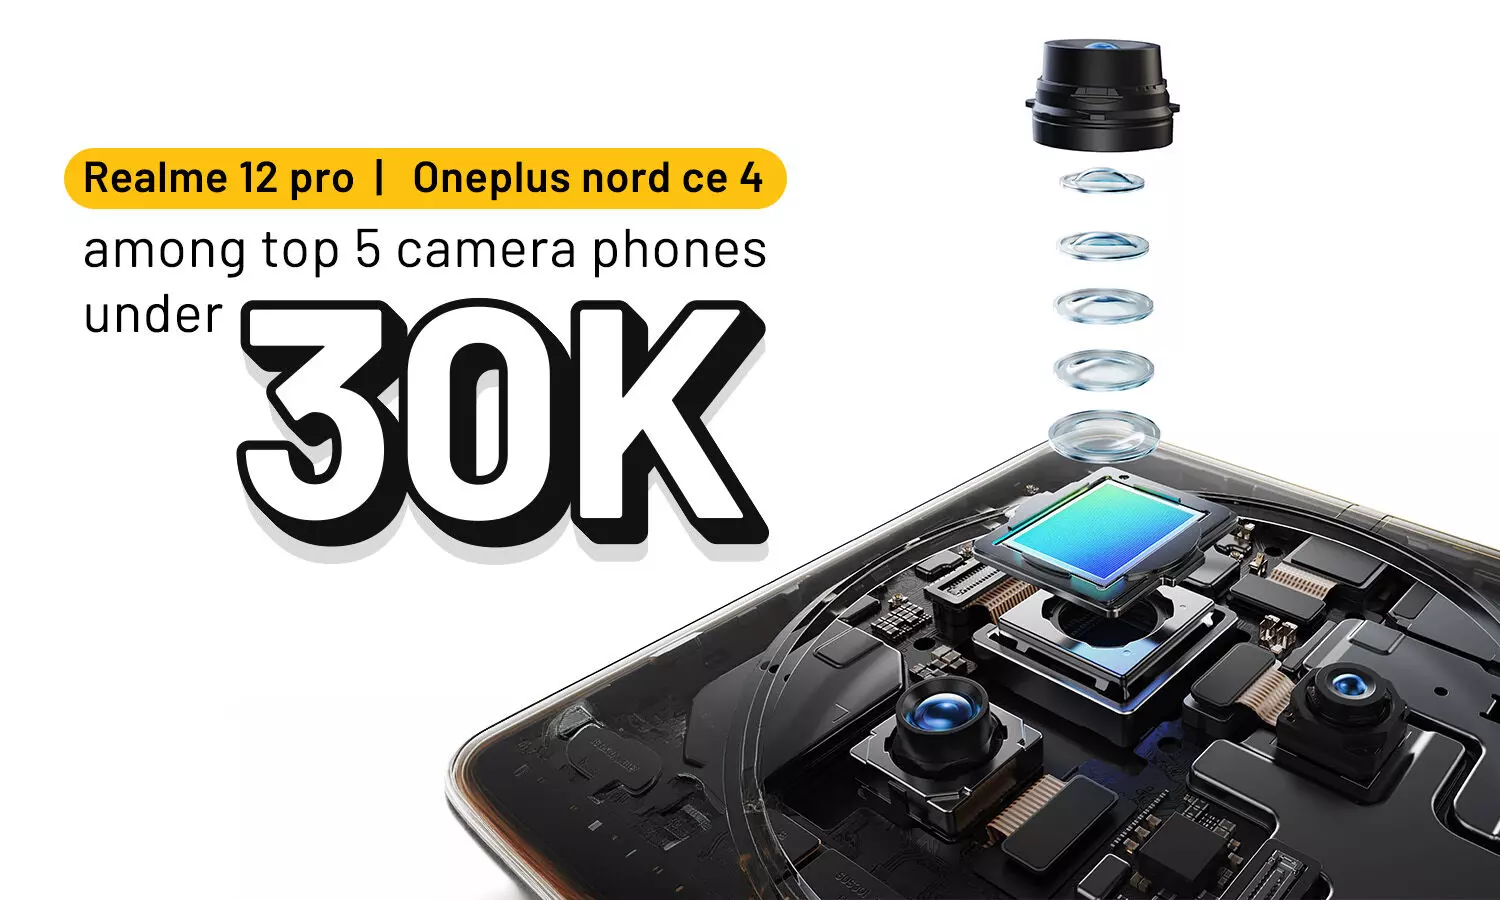 Realme 12 Pro+, OnePlus Nord CE 4 among top 5 camera phones under 30K